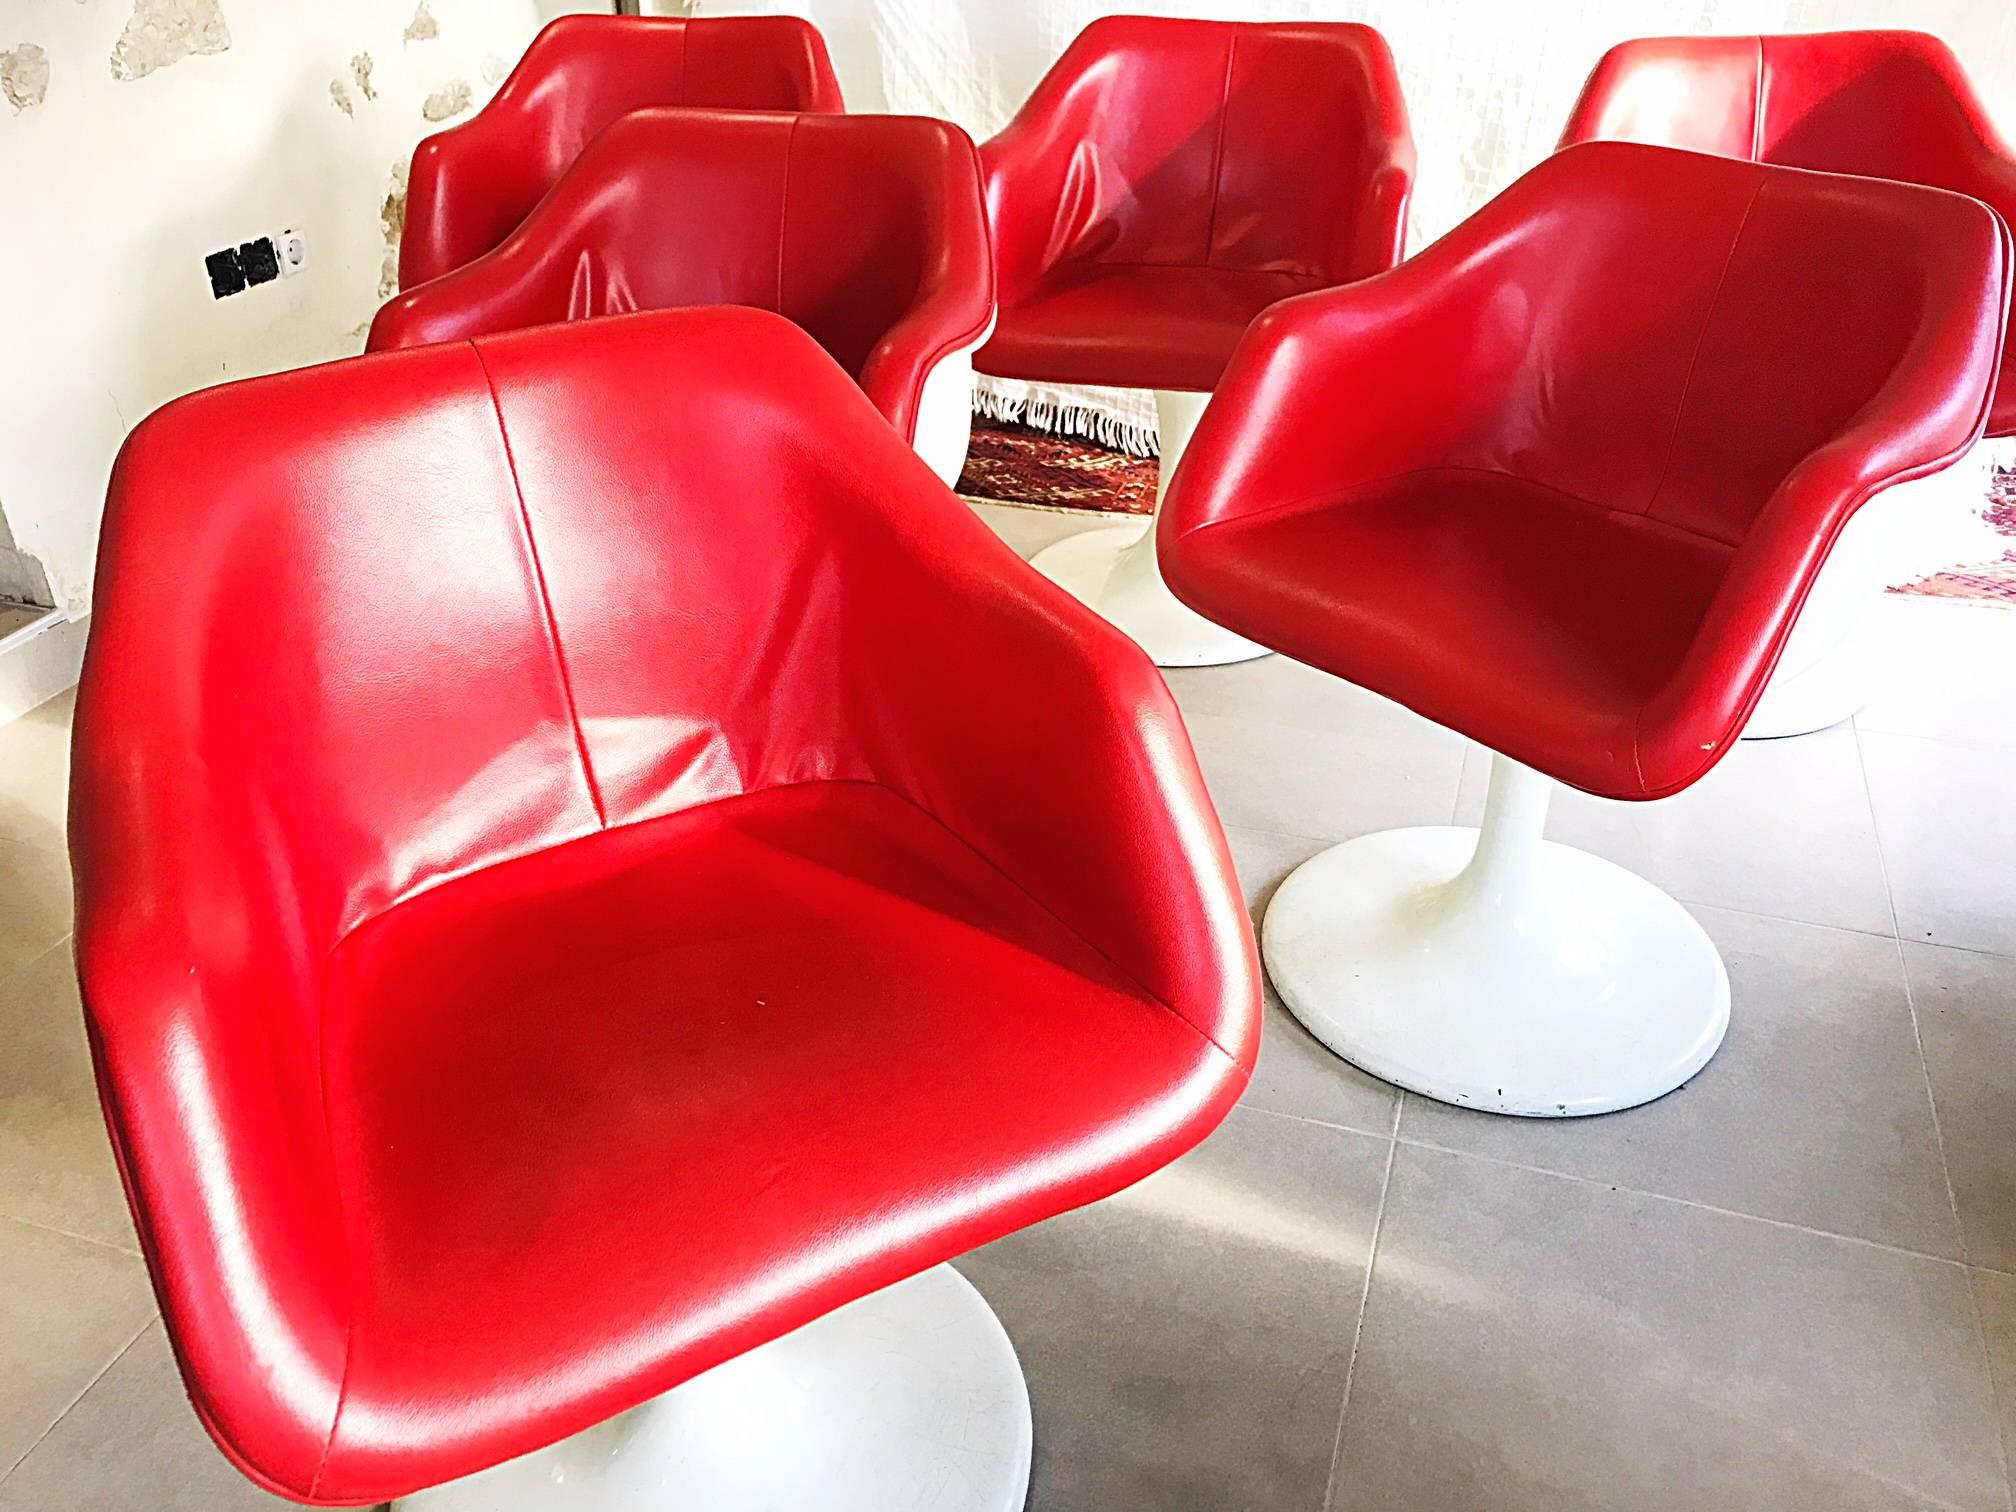  17 fiberglass tulip armchairs faux leather four armchairs identical tulip chairs, structurally sound. Original warm white finish. Red original Faux leather complete seat in good condition! We have in stock 4 pieces! We sell by 4/6/12/17 set all